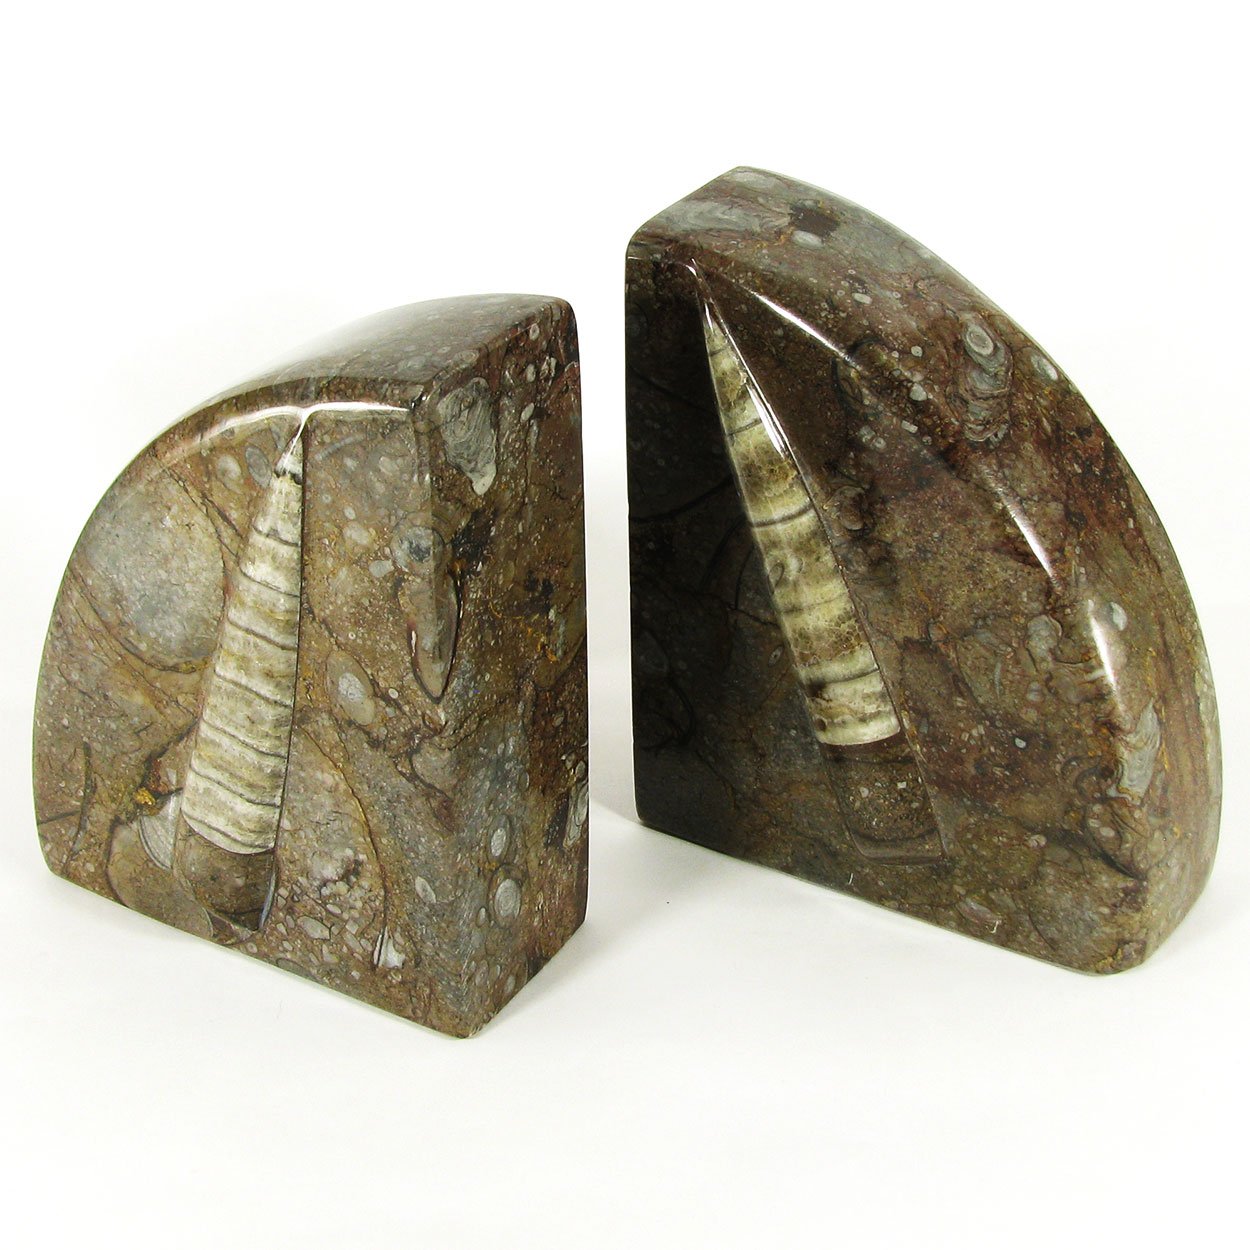 140049 - 6in Polished Fossil Bookends - Brown